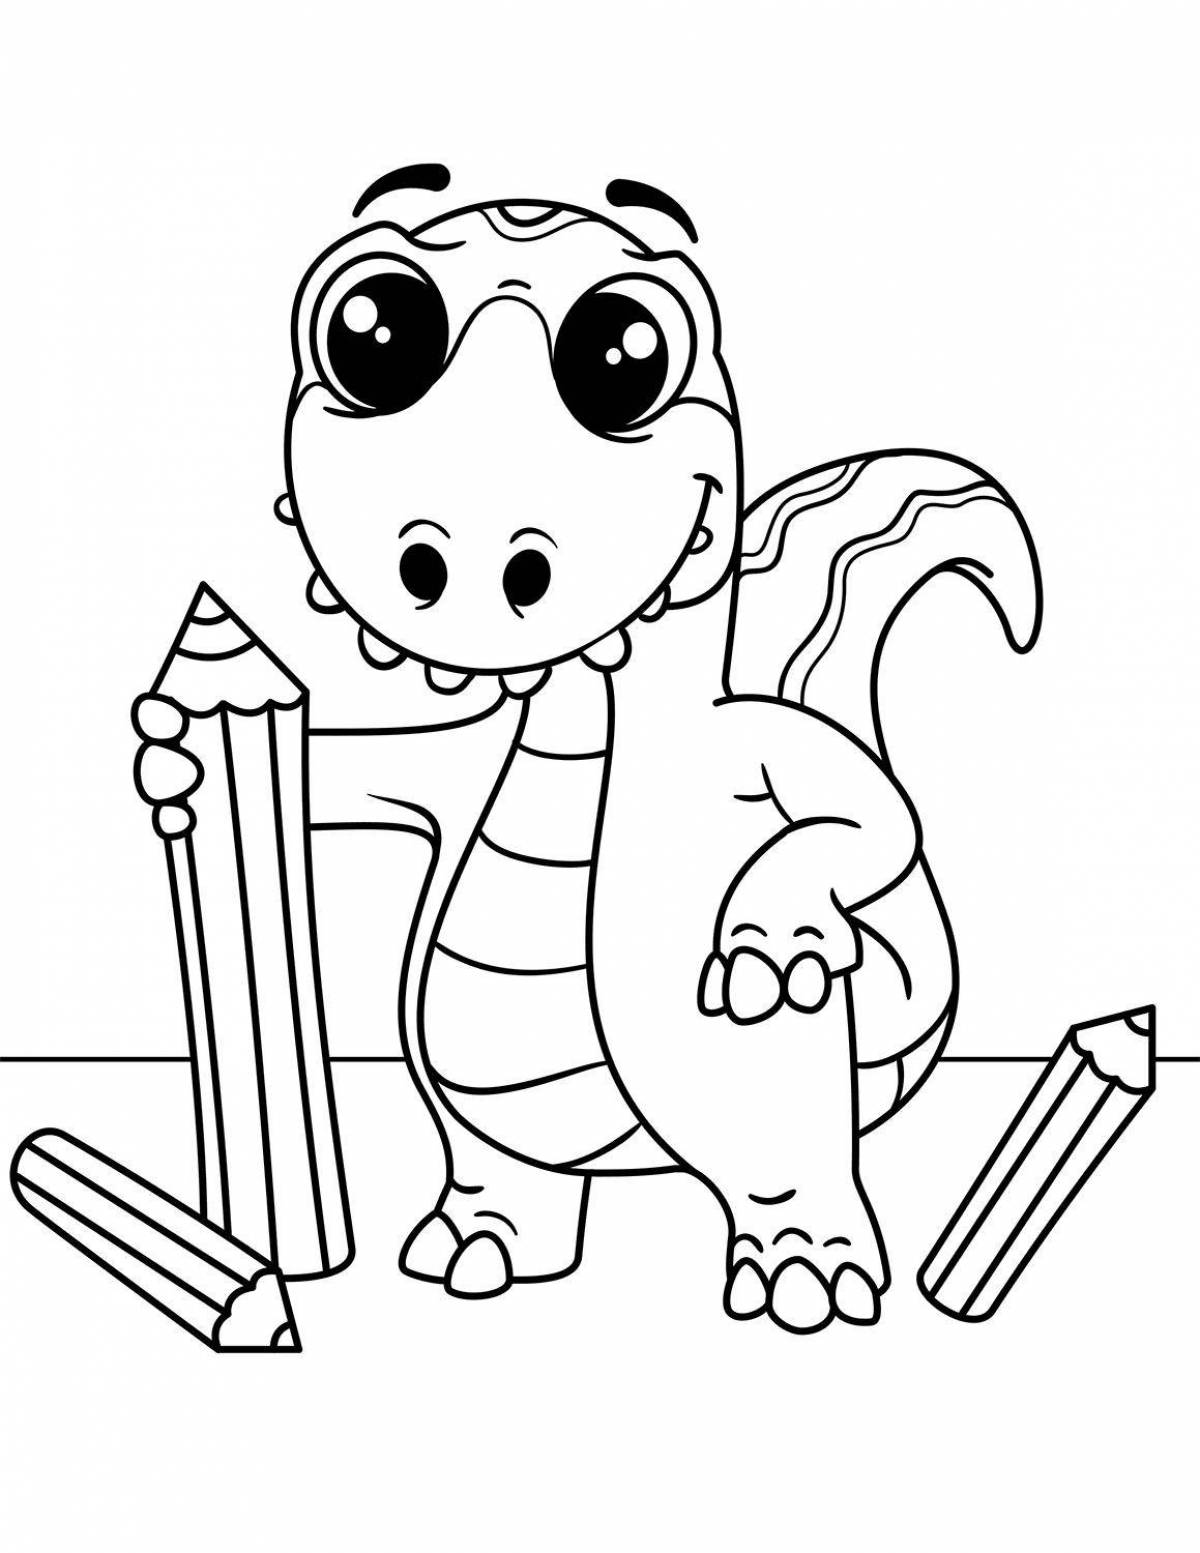 Outstanding dinosaur coloring page for kids